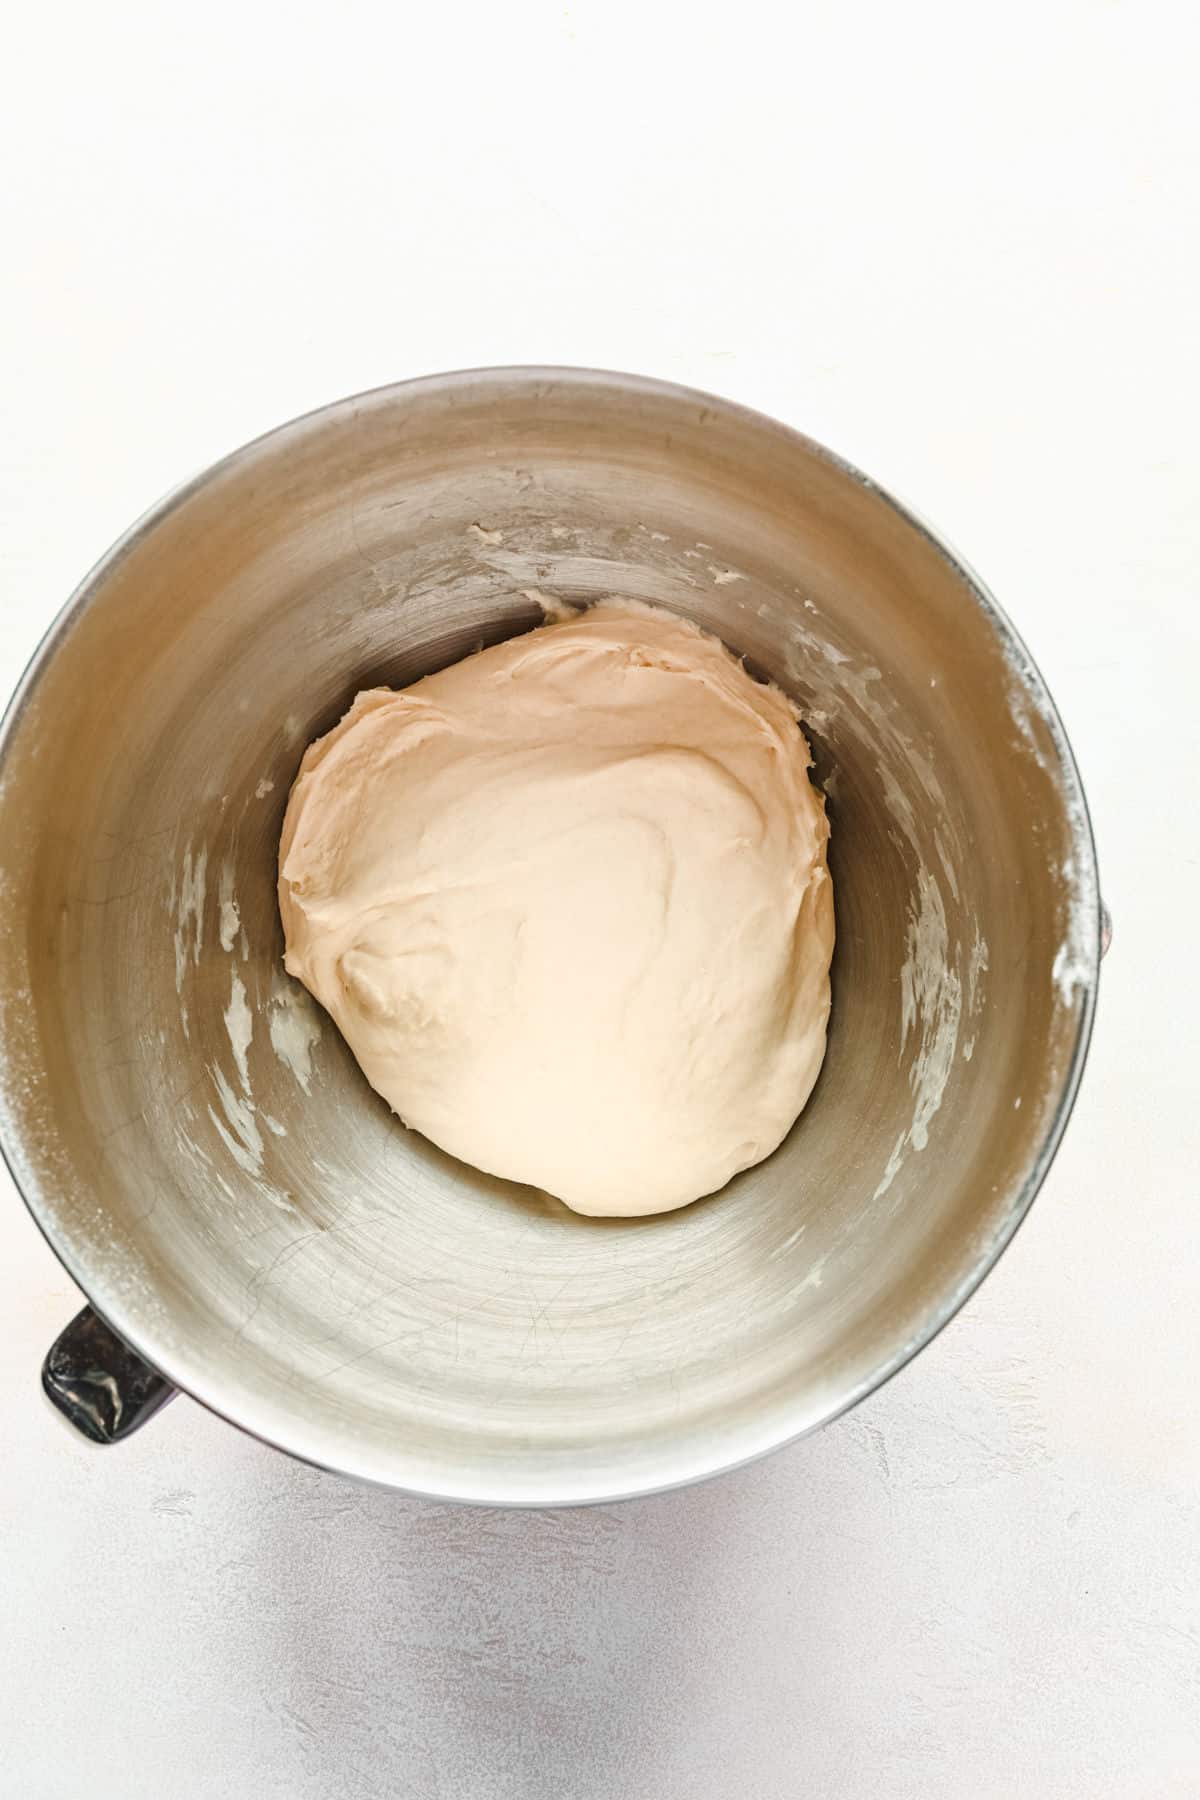 Ball of homemade pizza dough in a silver mixing bowl.